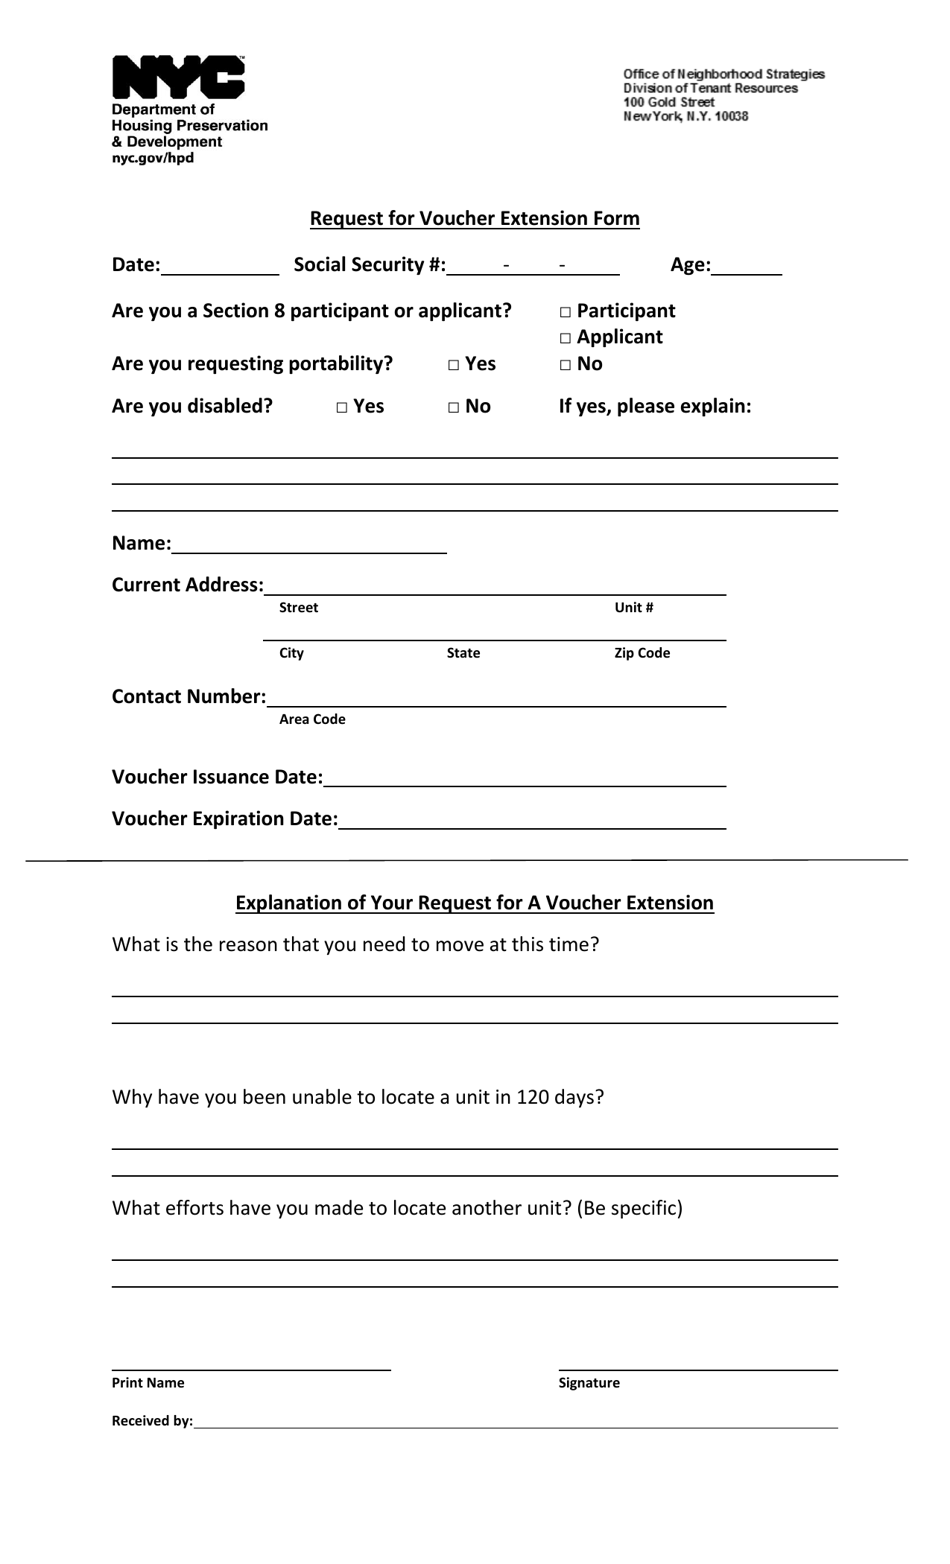 Request for Voucher Extension Form - New York City, Page 1